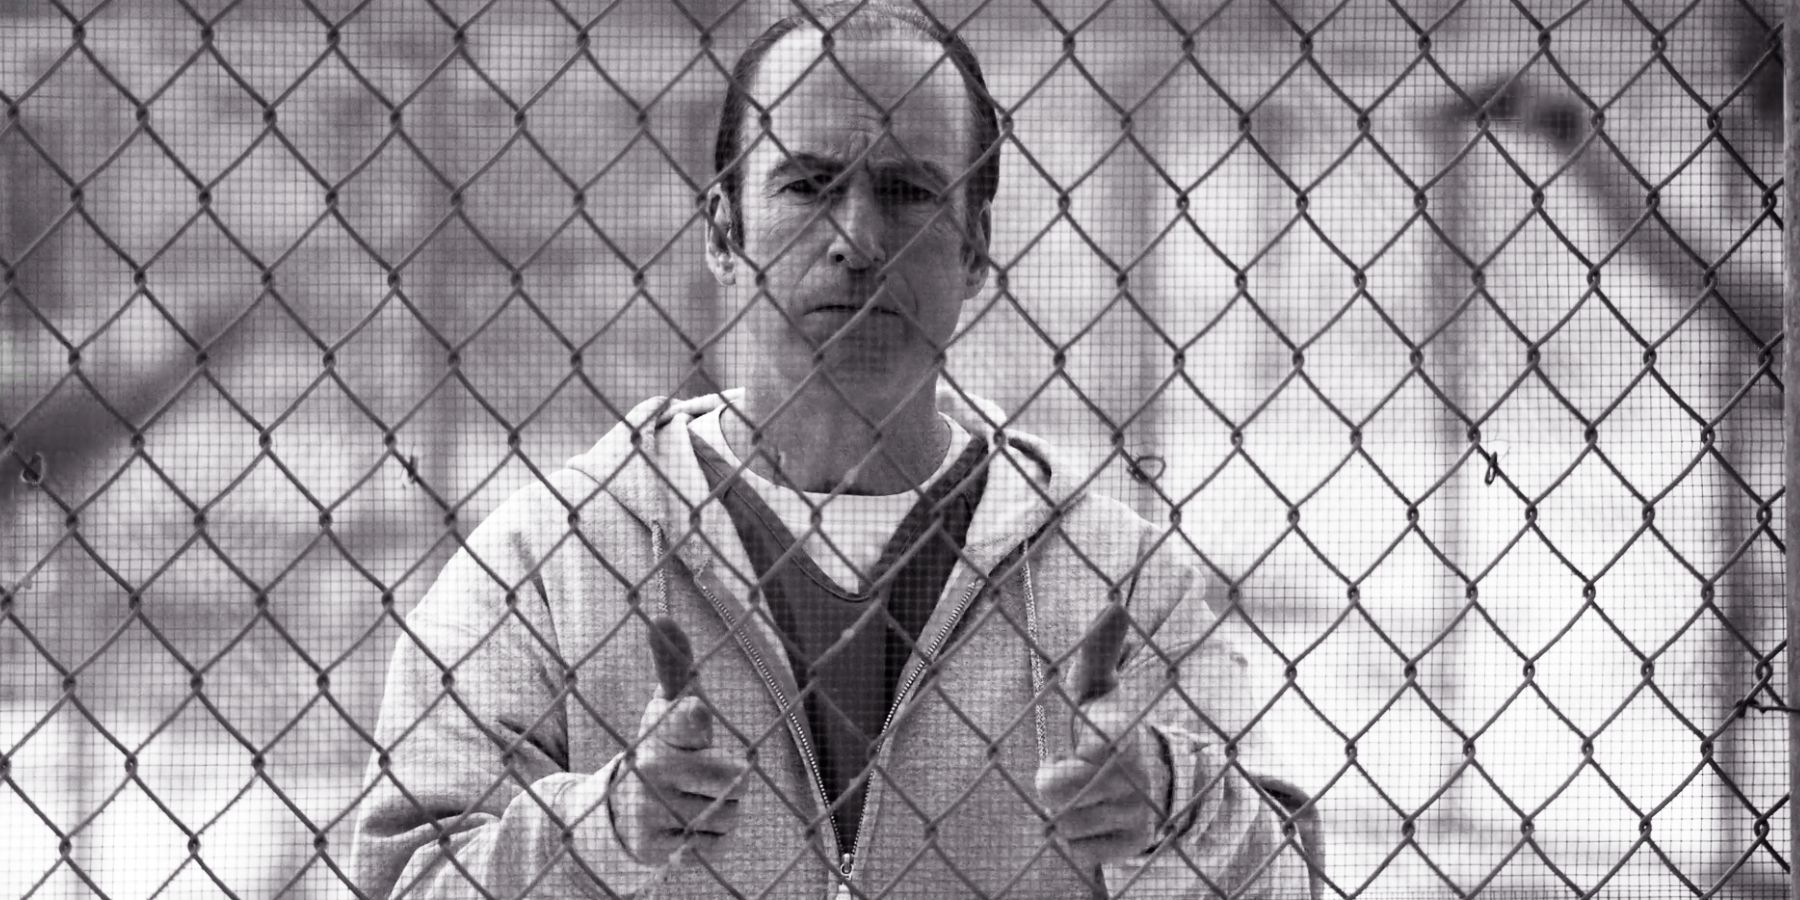 Bob Odenkirk as James McGill in prison in the Better Call Saul finale